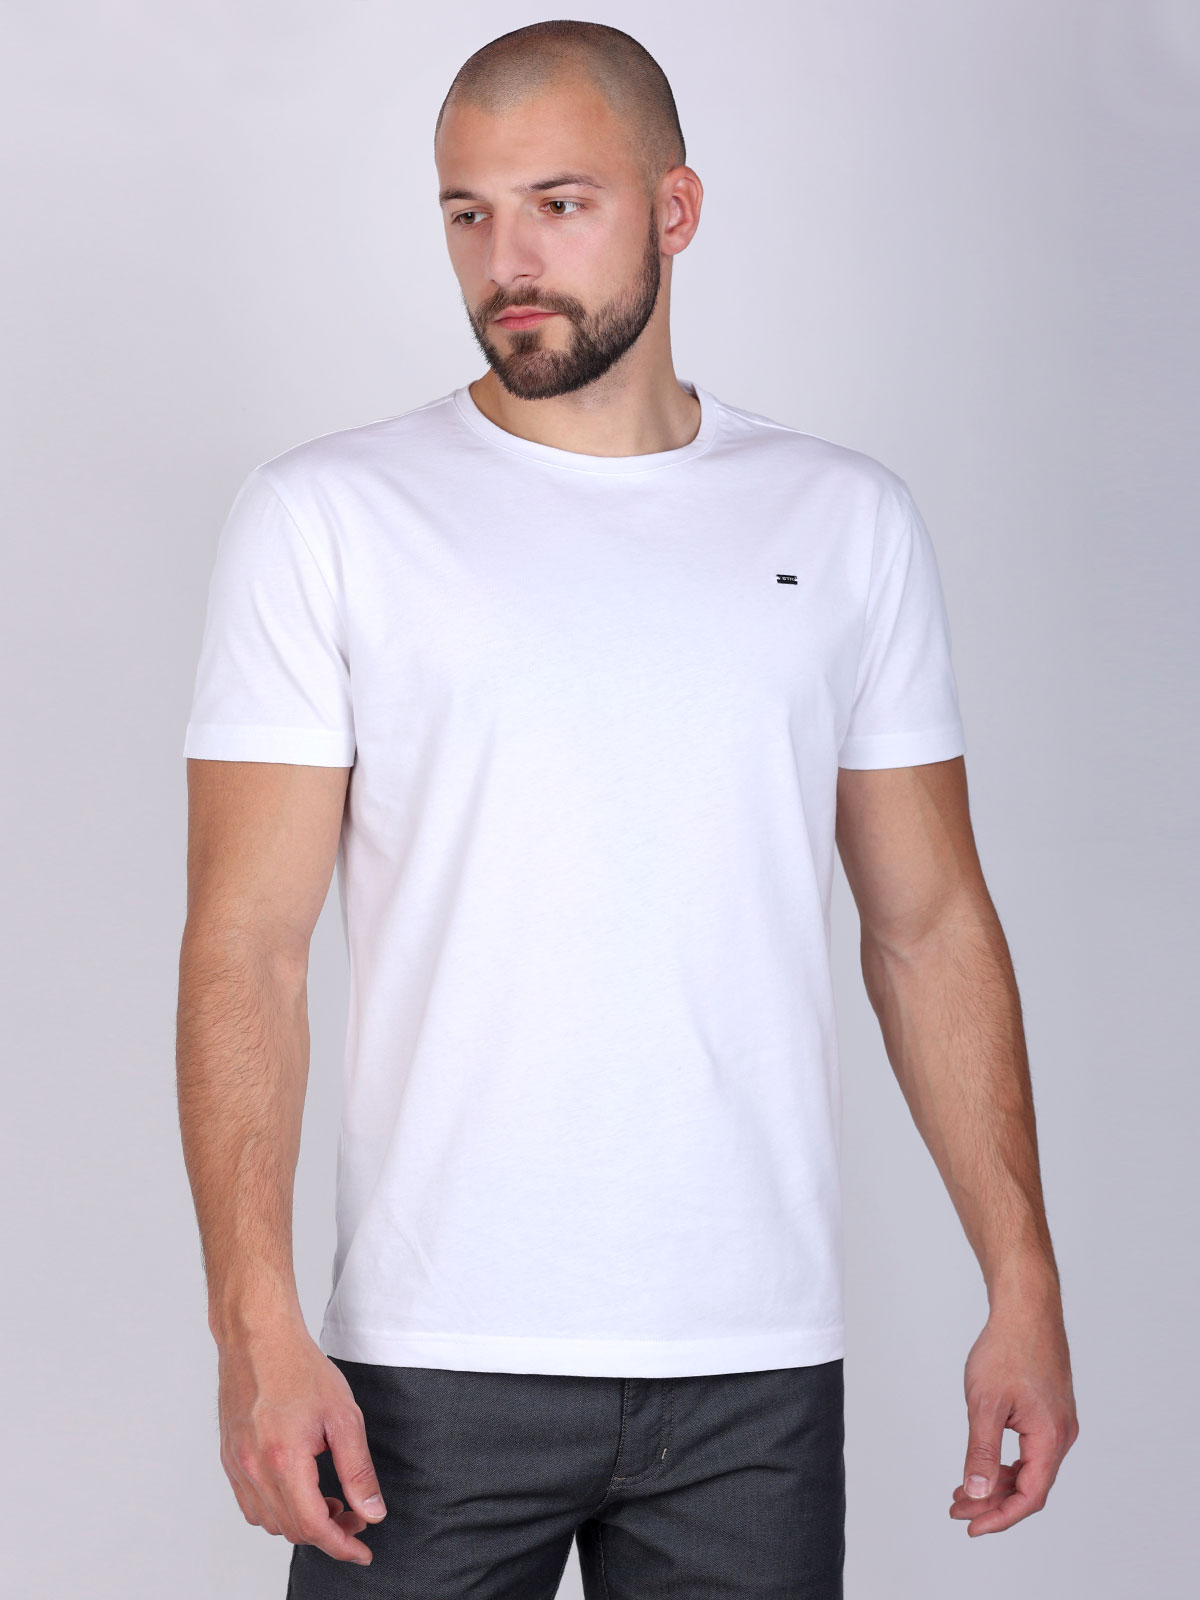 Set of tshirts in white and blue - 13014 - € 34.87 img3